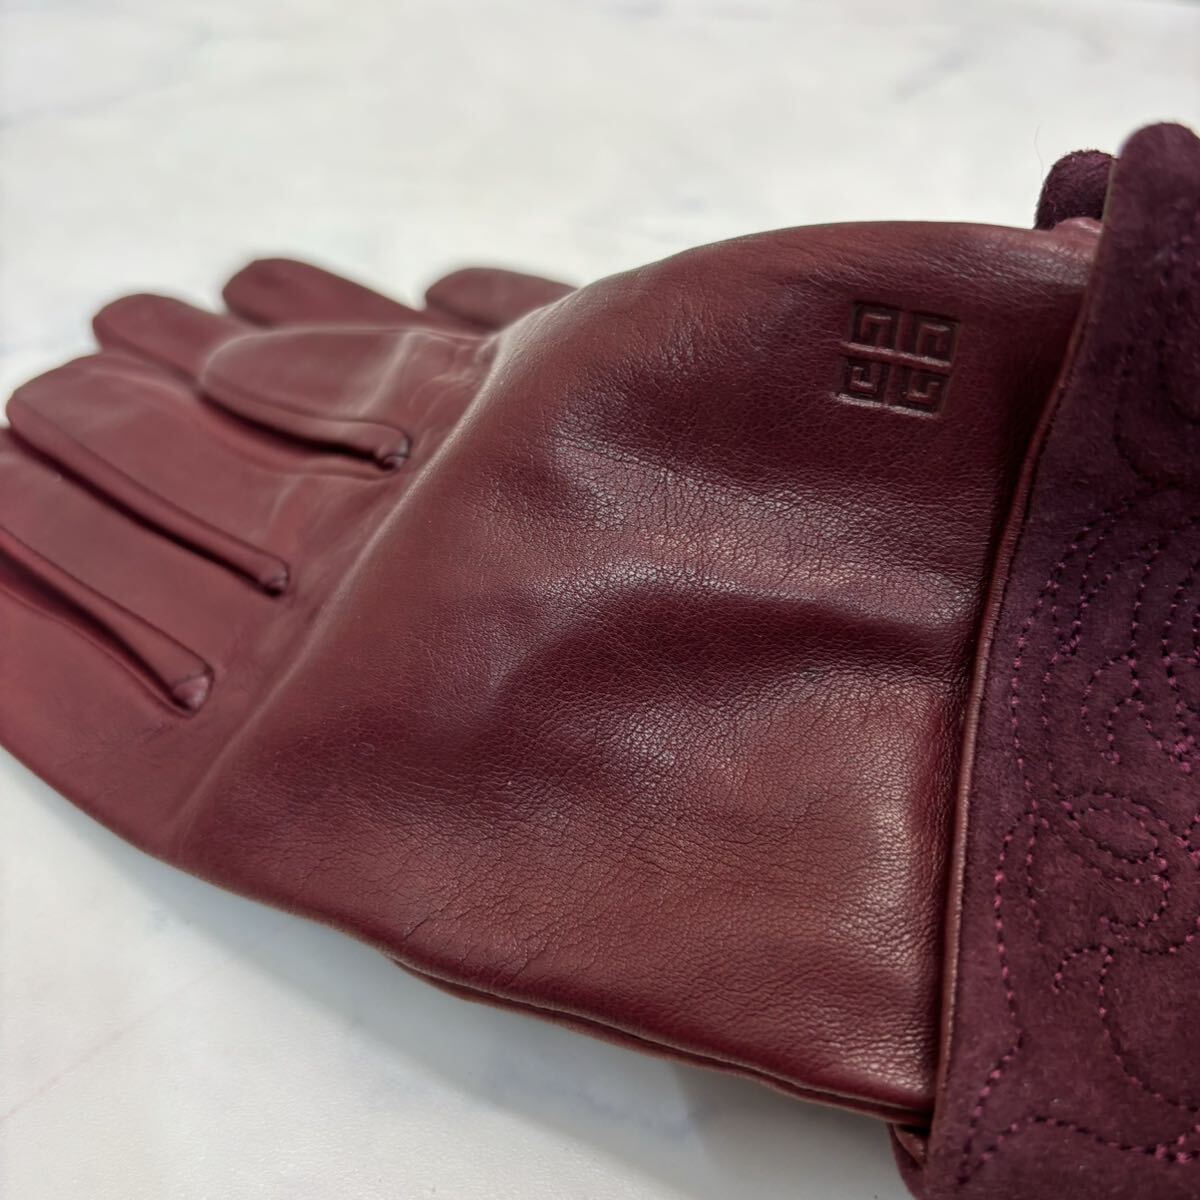  tag equipped Givenchy sheep leather glove leather gloves wine red lady's original leather 20. bordeaux 